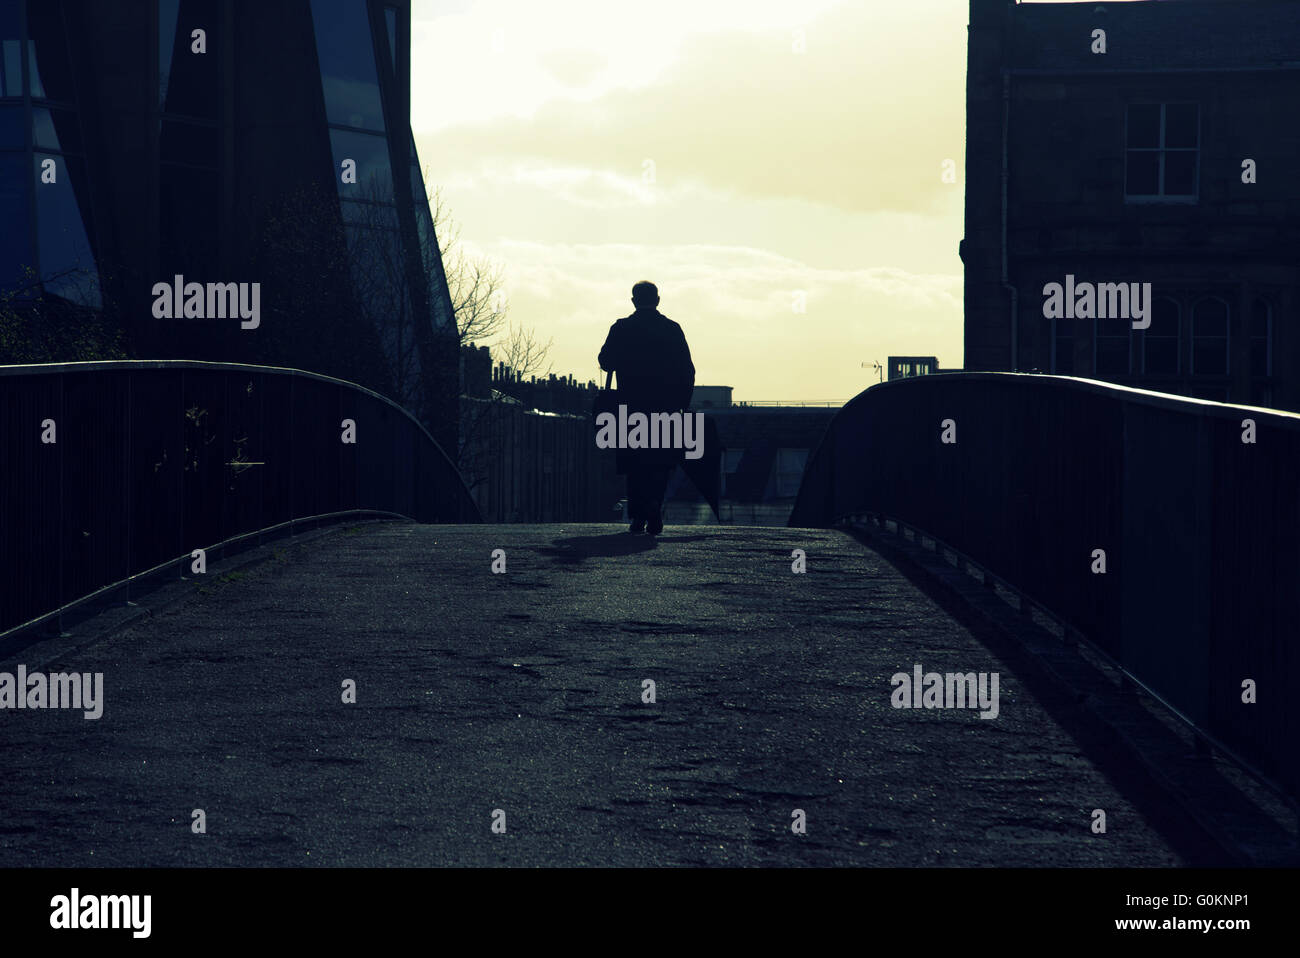 Cityscape silhouette of man with railings in Glasgow Stock Photo